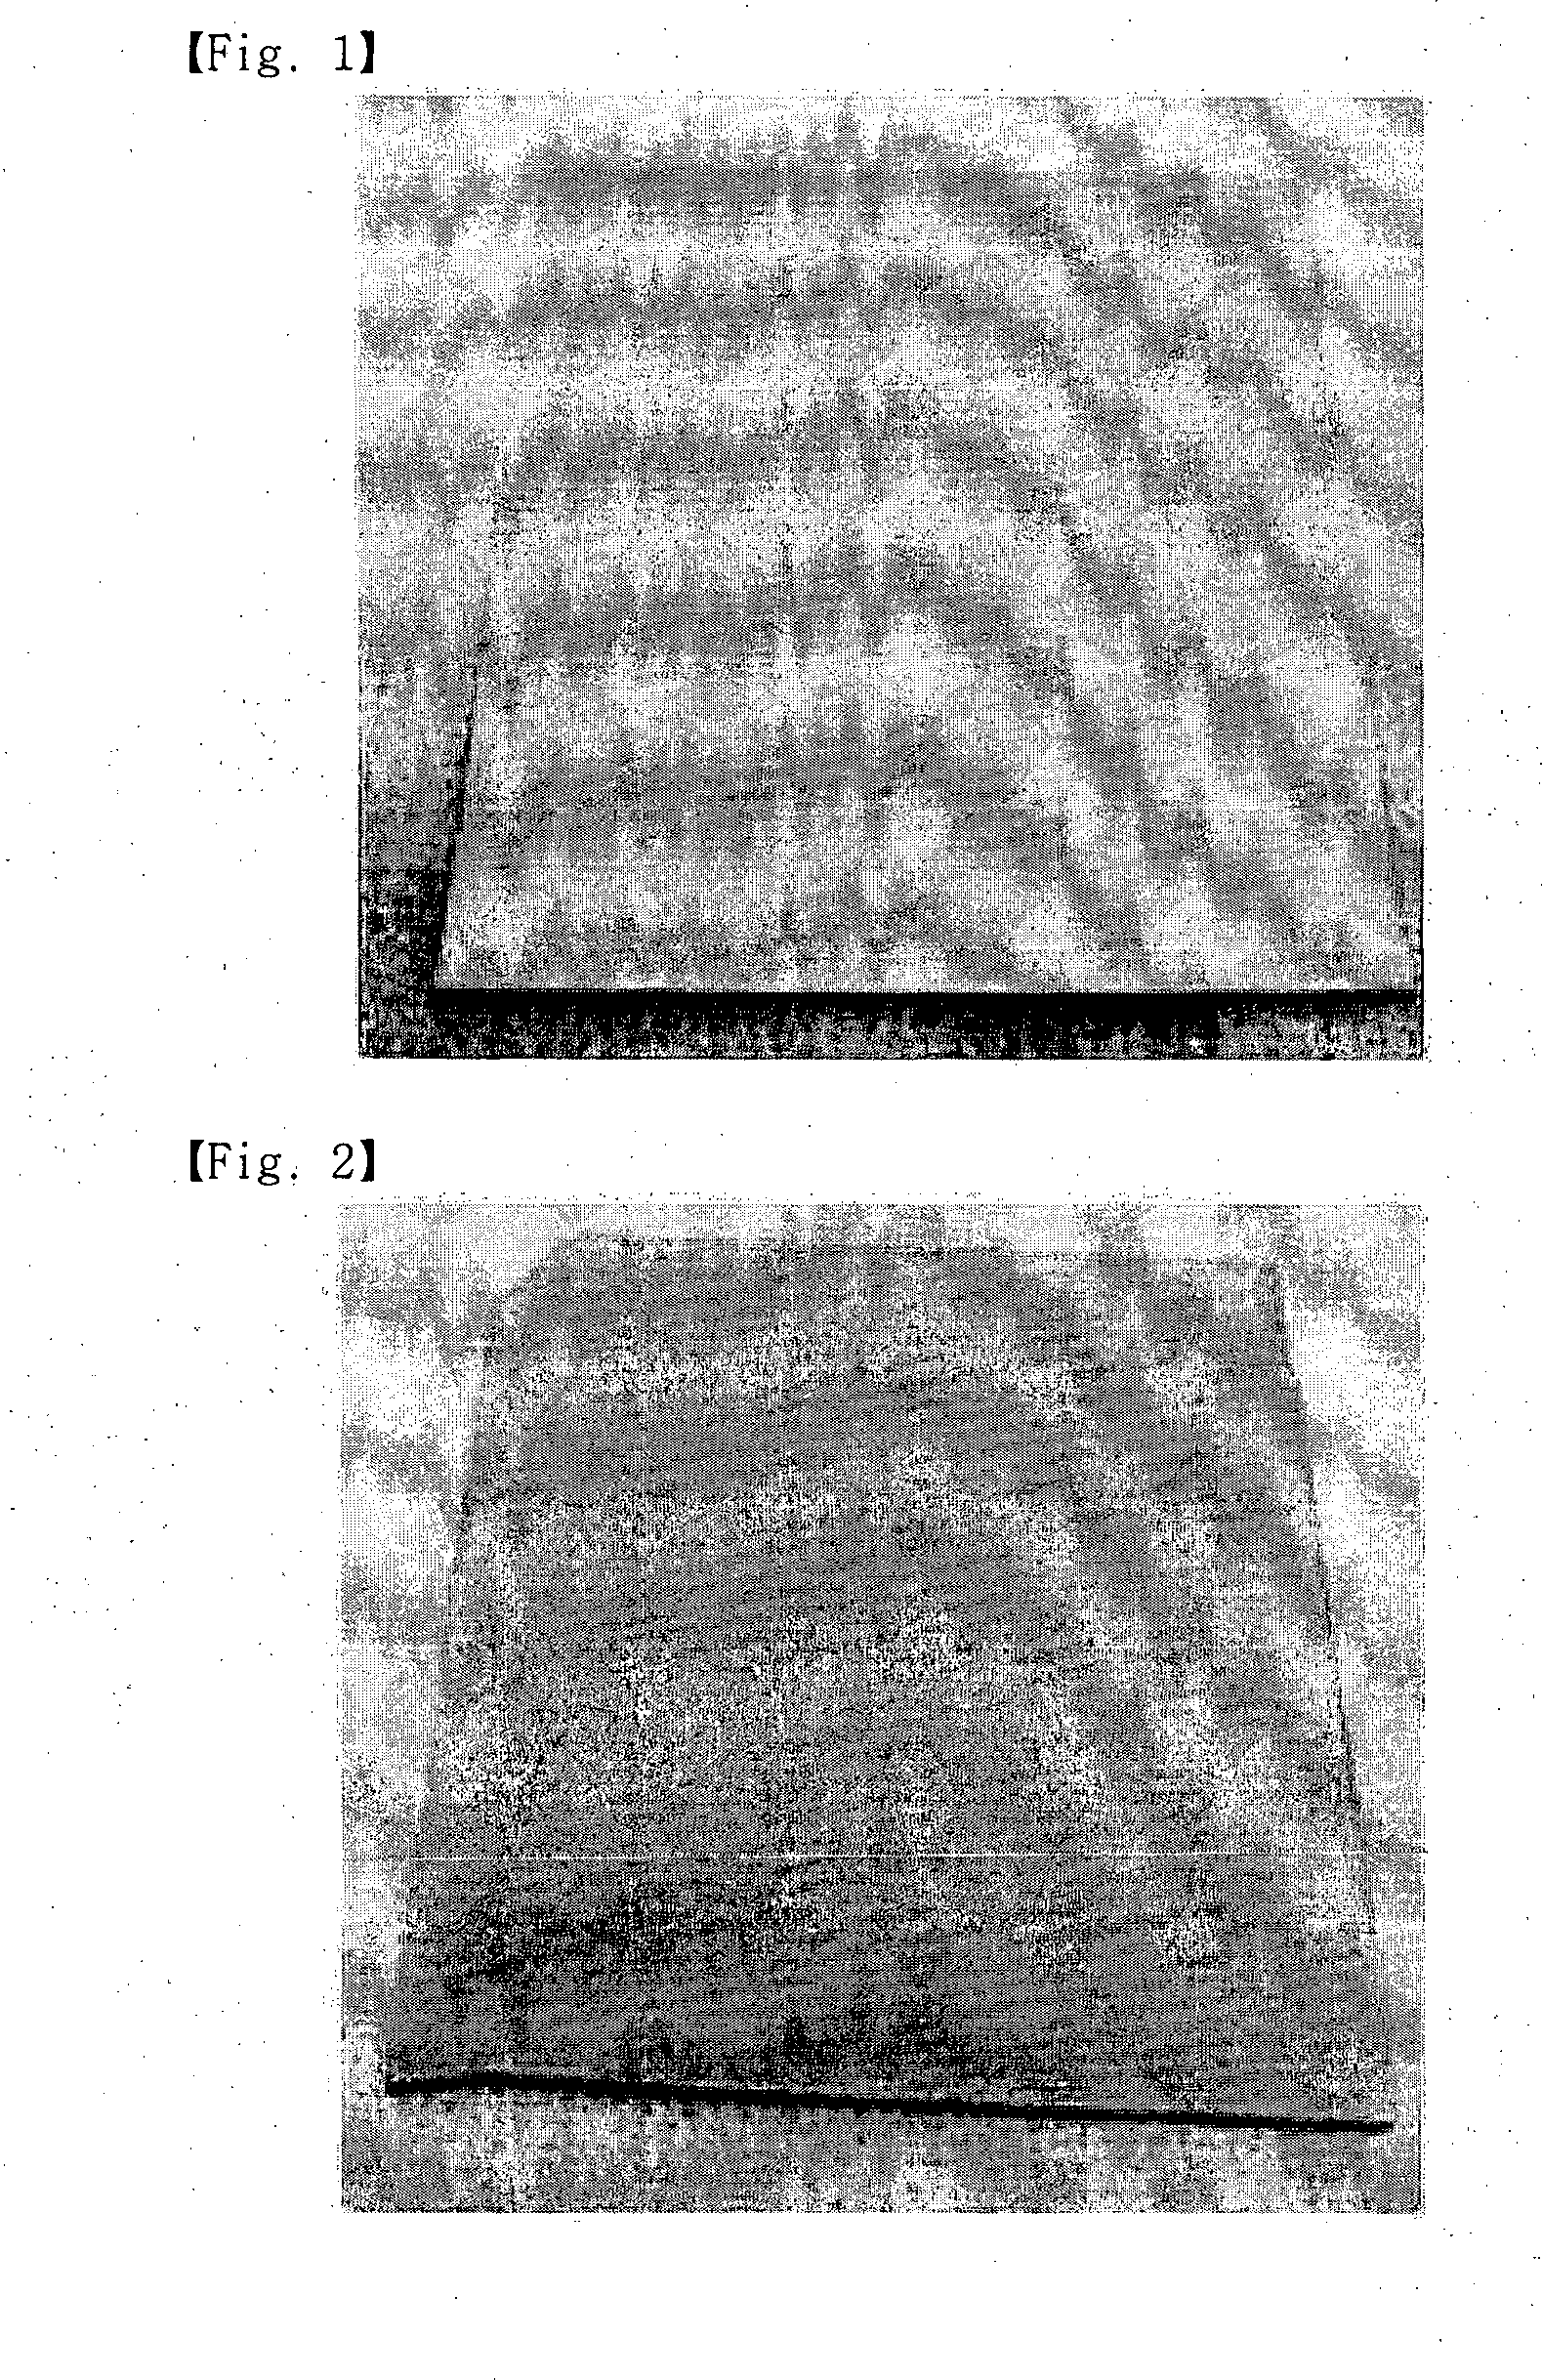 Composition for Removing and Preventing Formation of Oxide on the Surface of Metal Wire